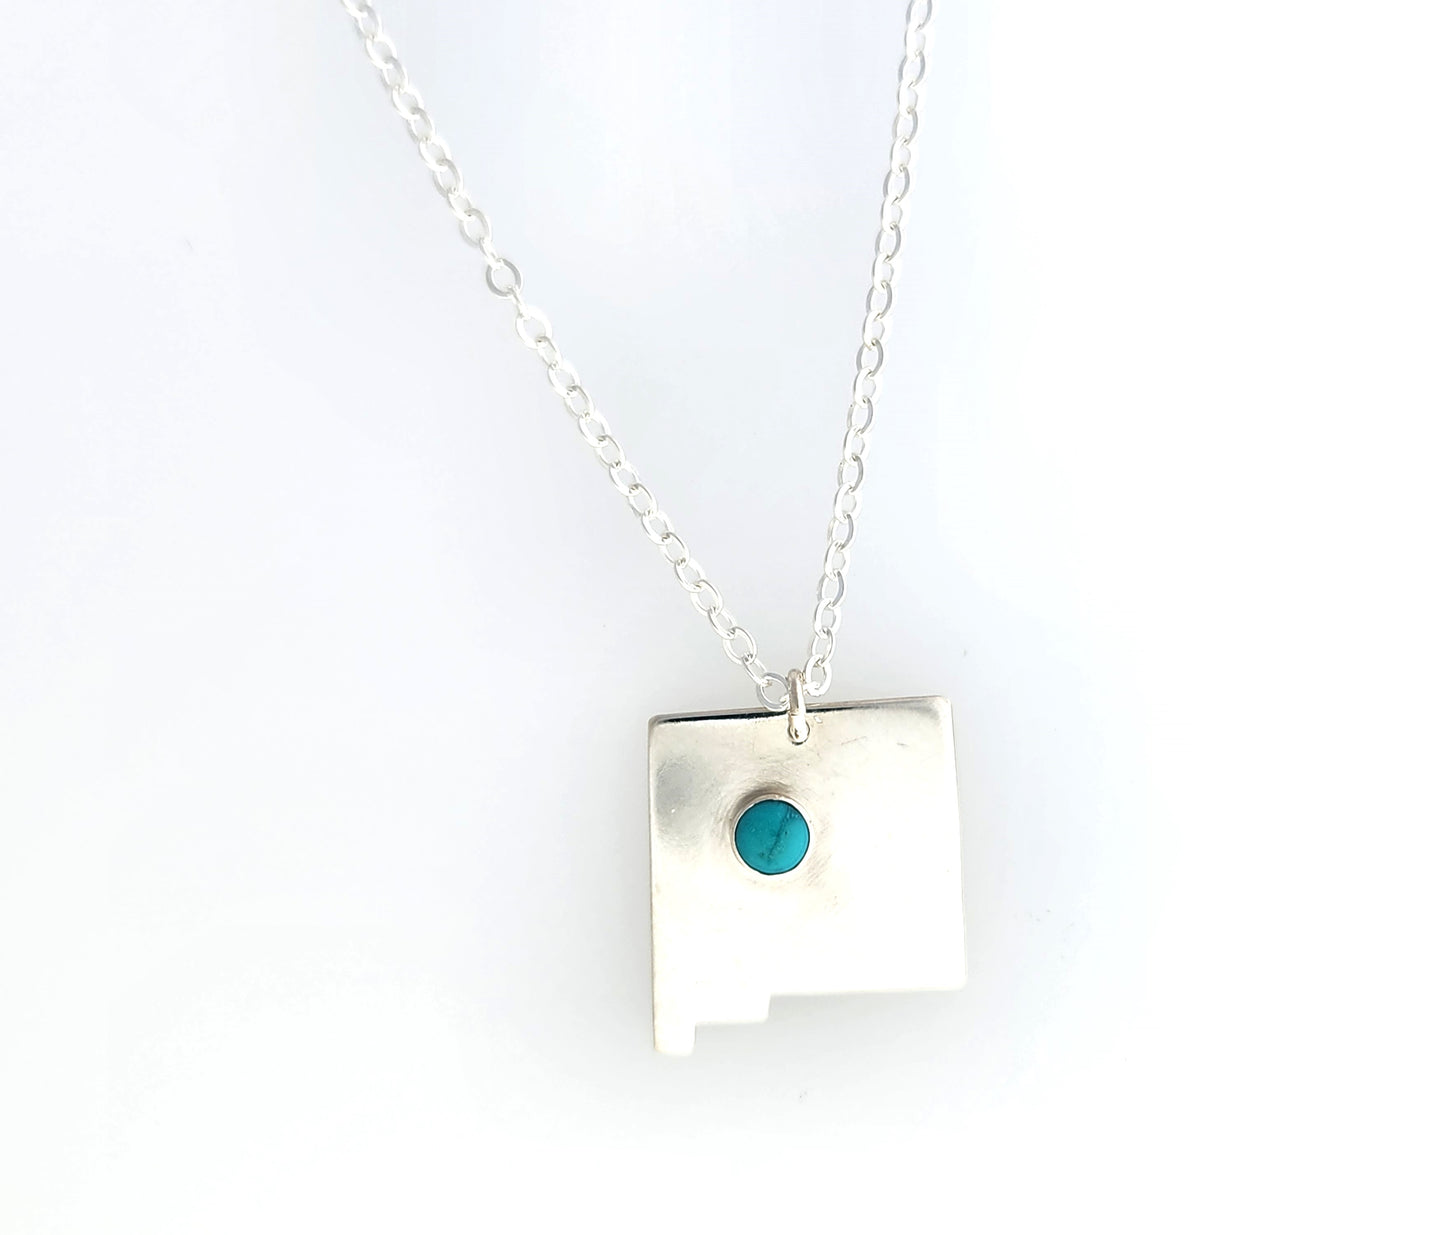 New Mexico pendant with turquoise